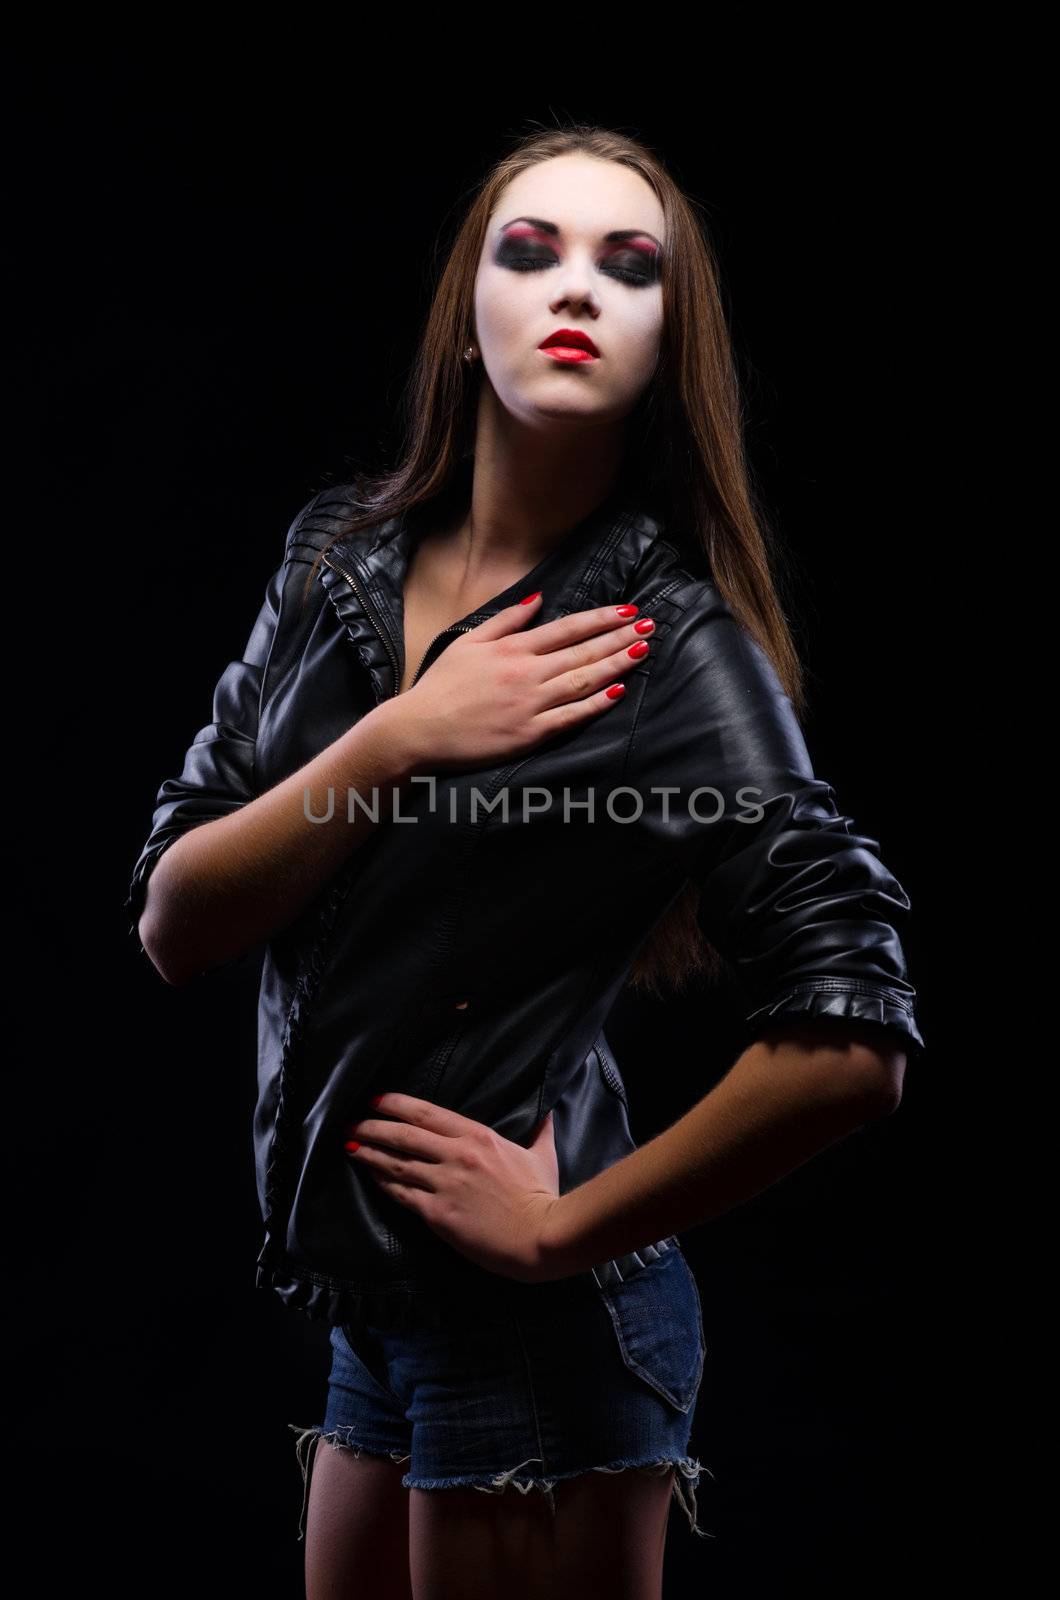 Fashion style portrait of young girl